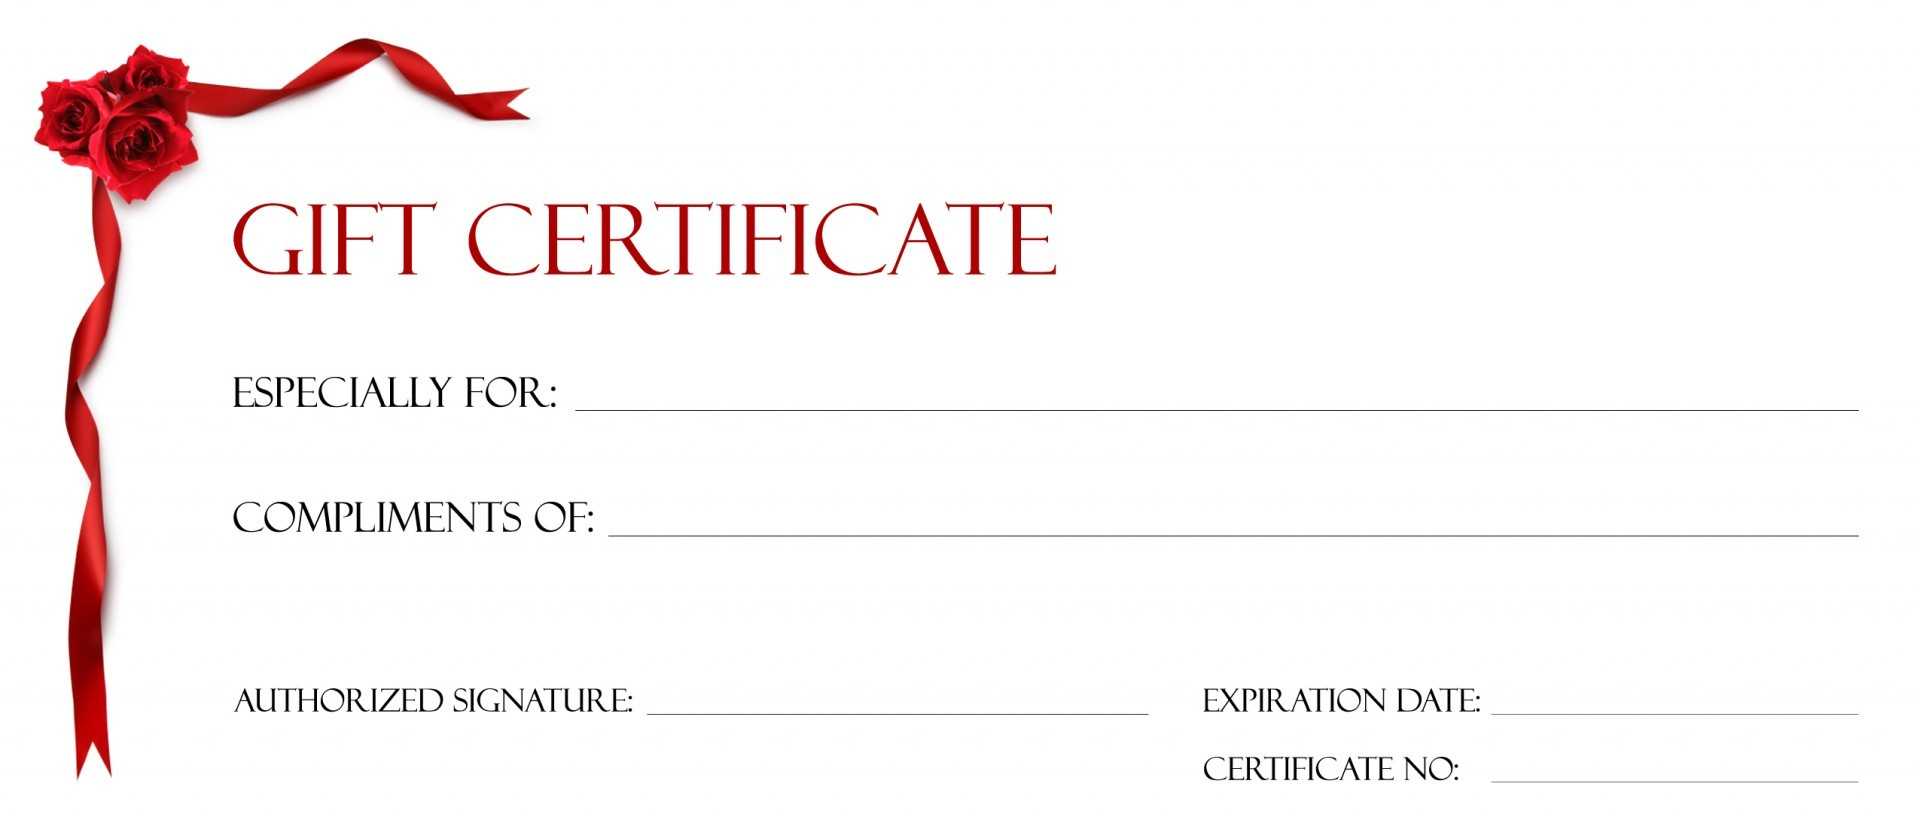 Gift Certificate Template For Google Docs Intended For Salon Gift Certificate Template